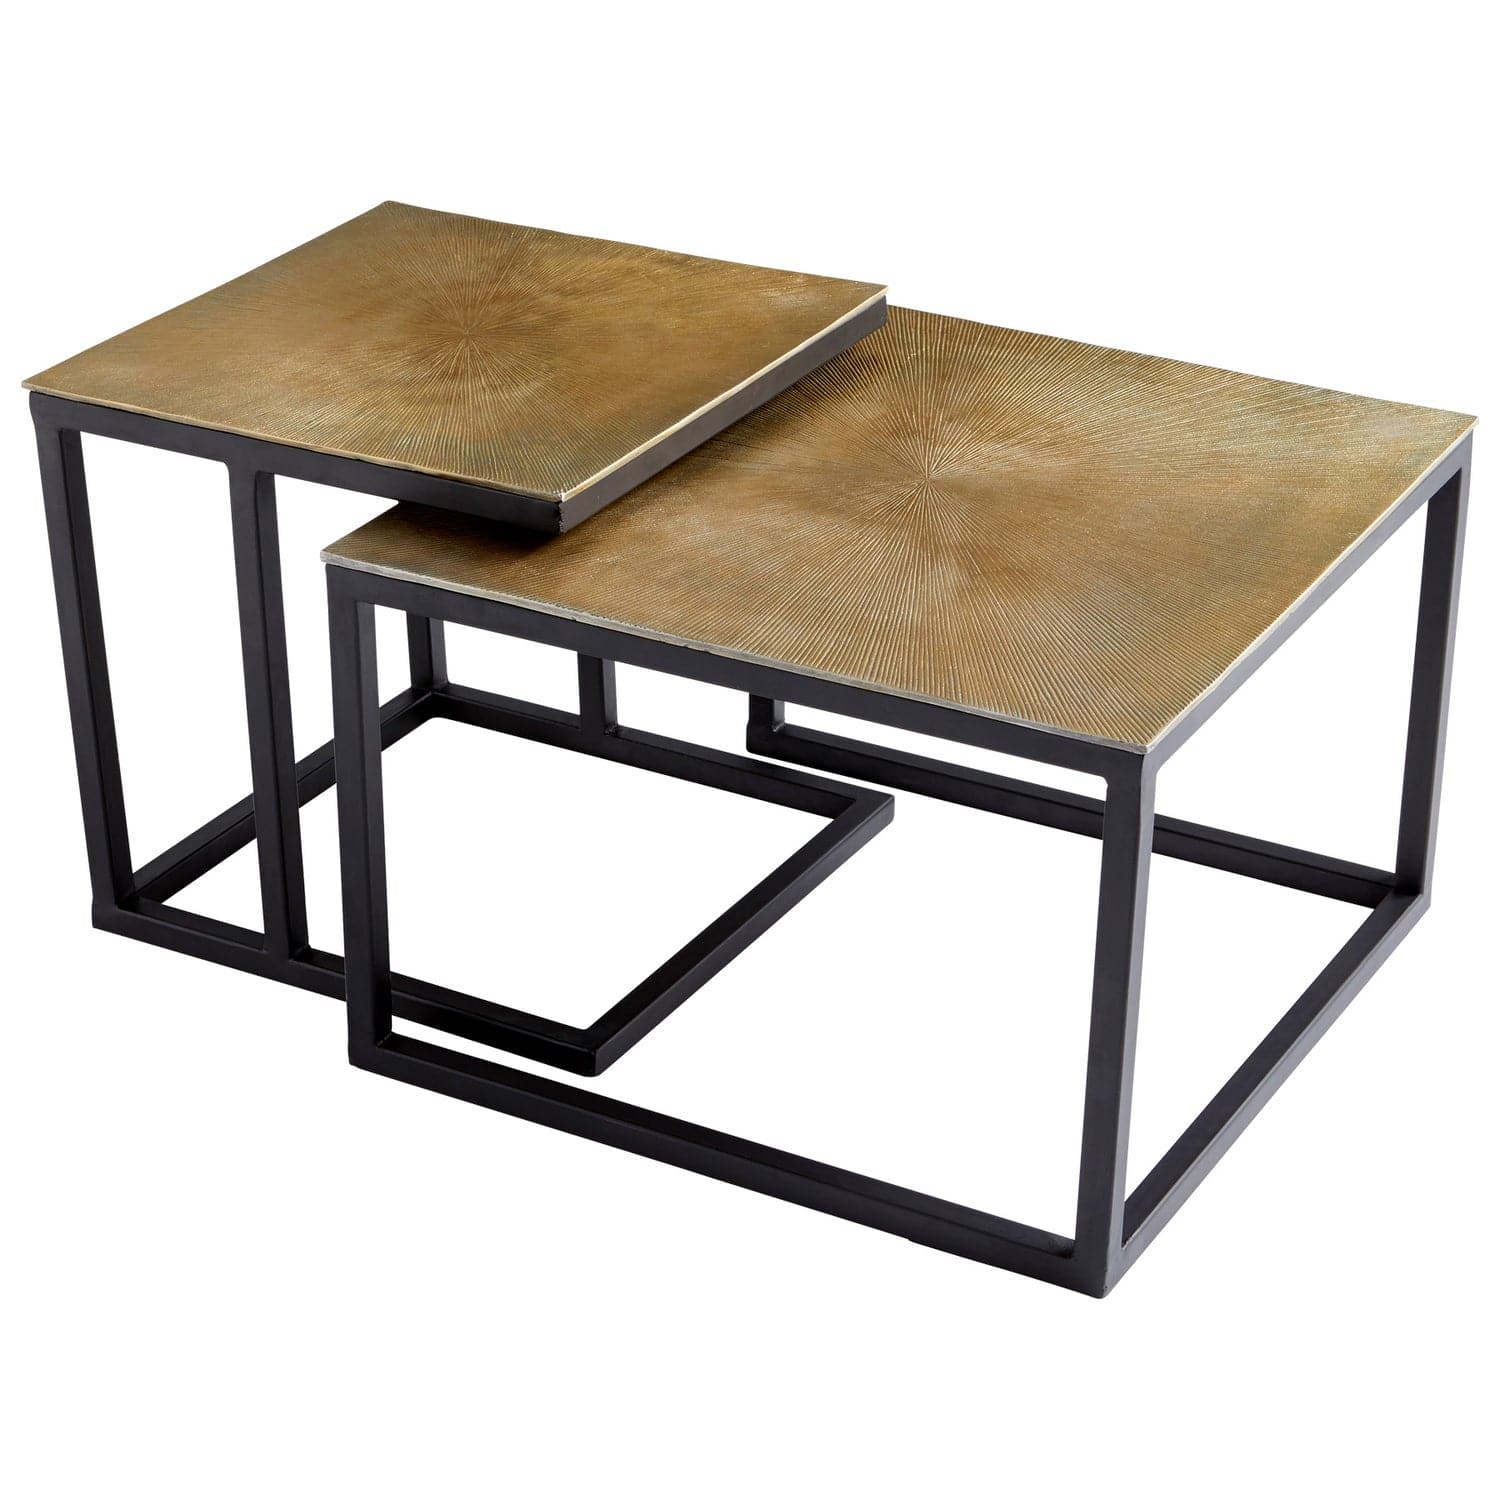 Cyan - 09712 - Nesting Tables - Black And Brass